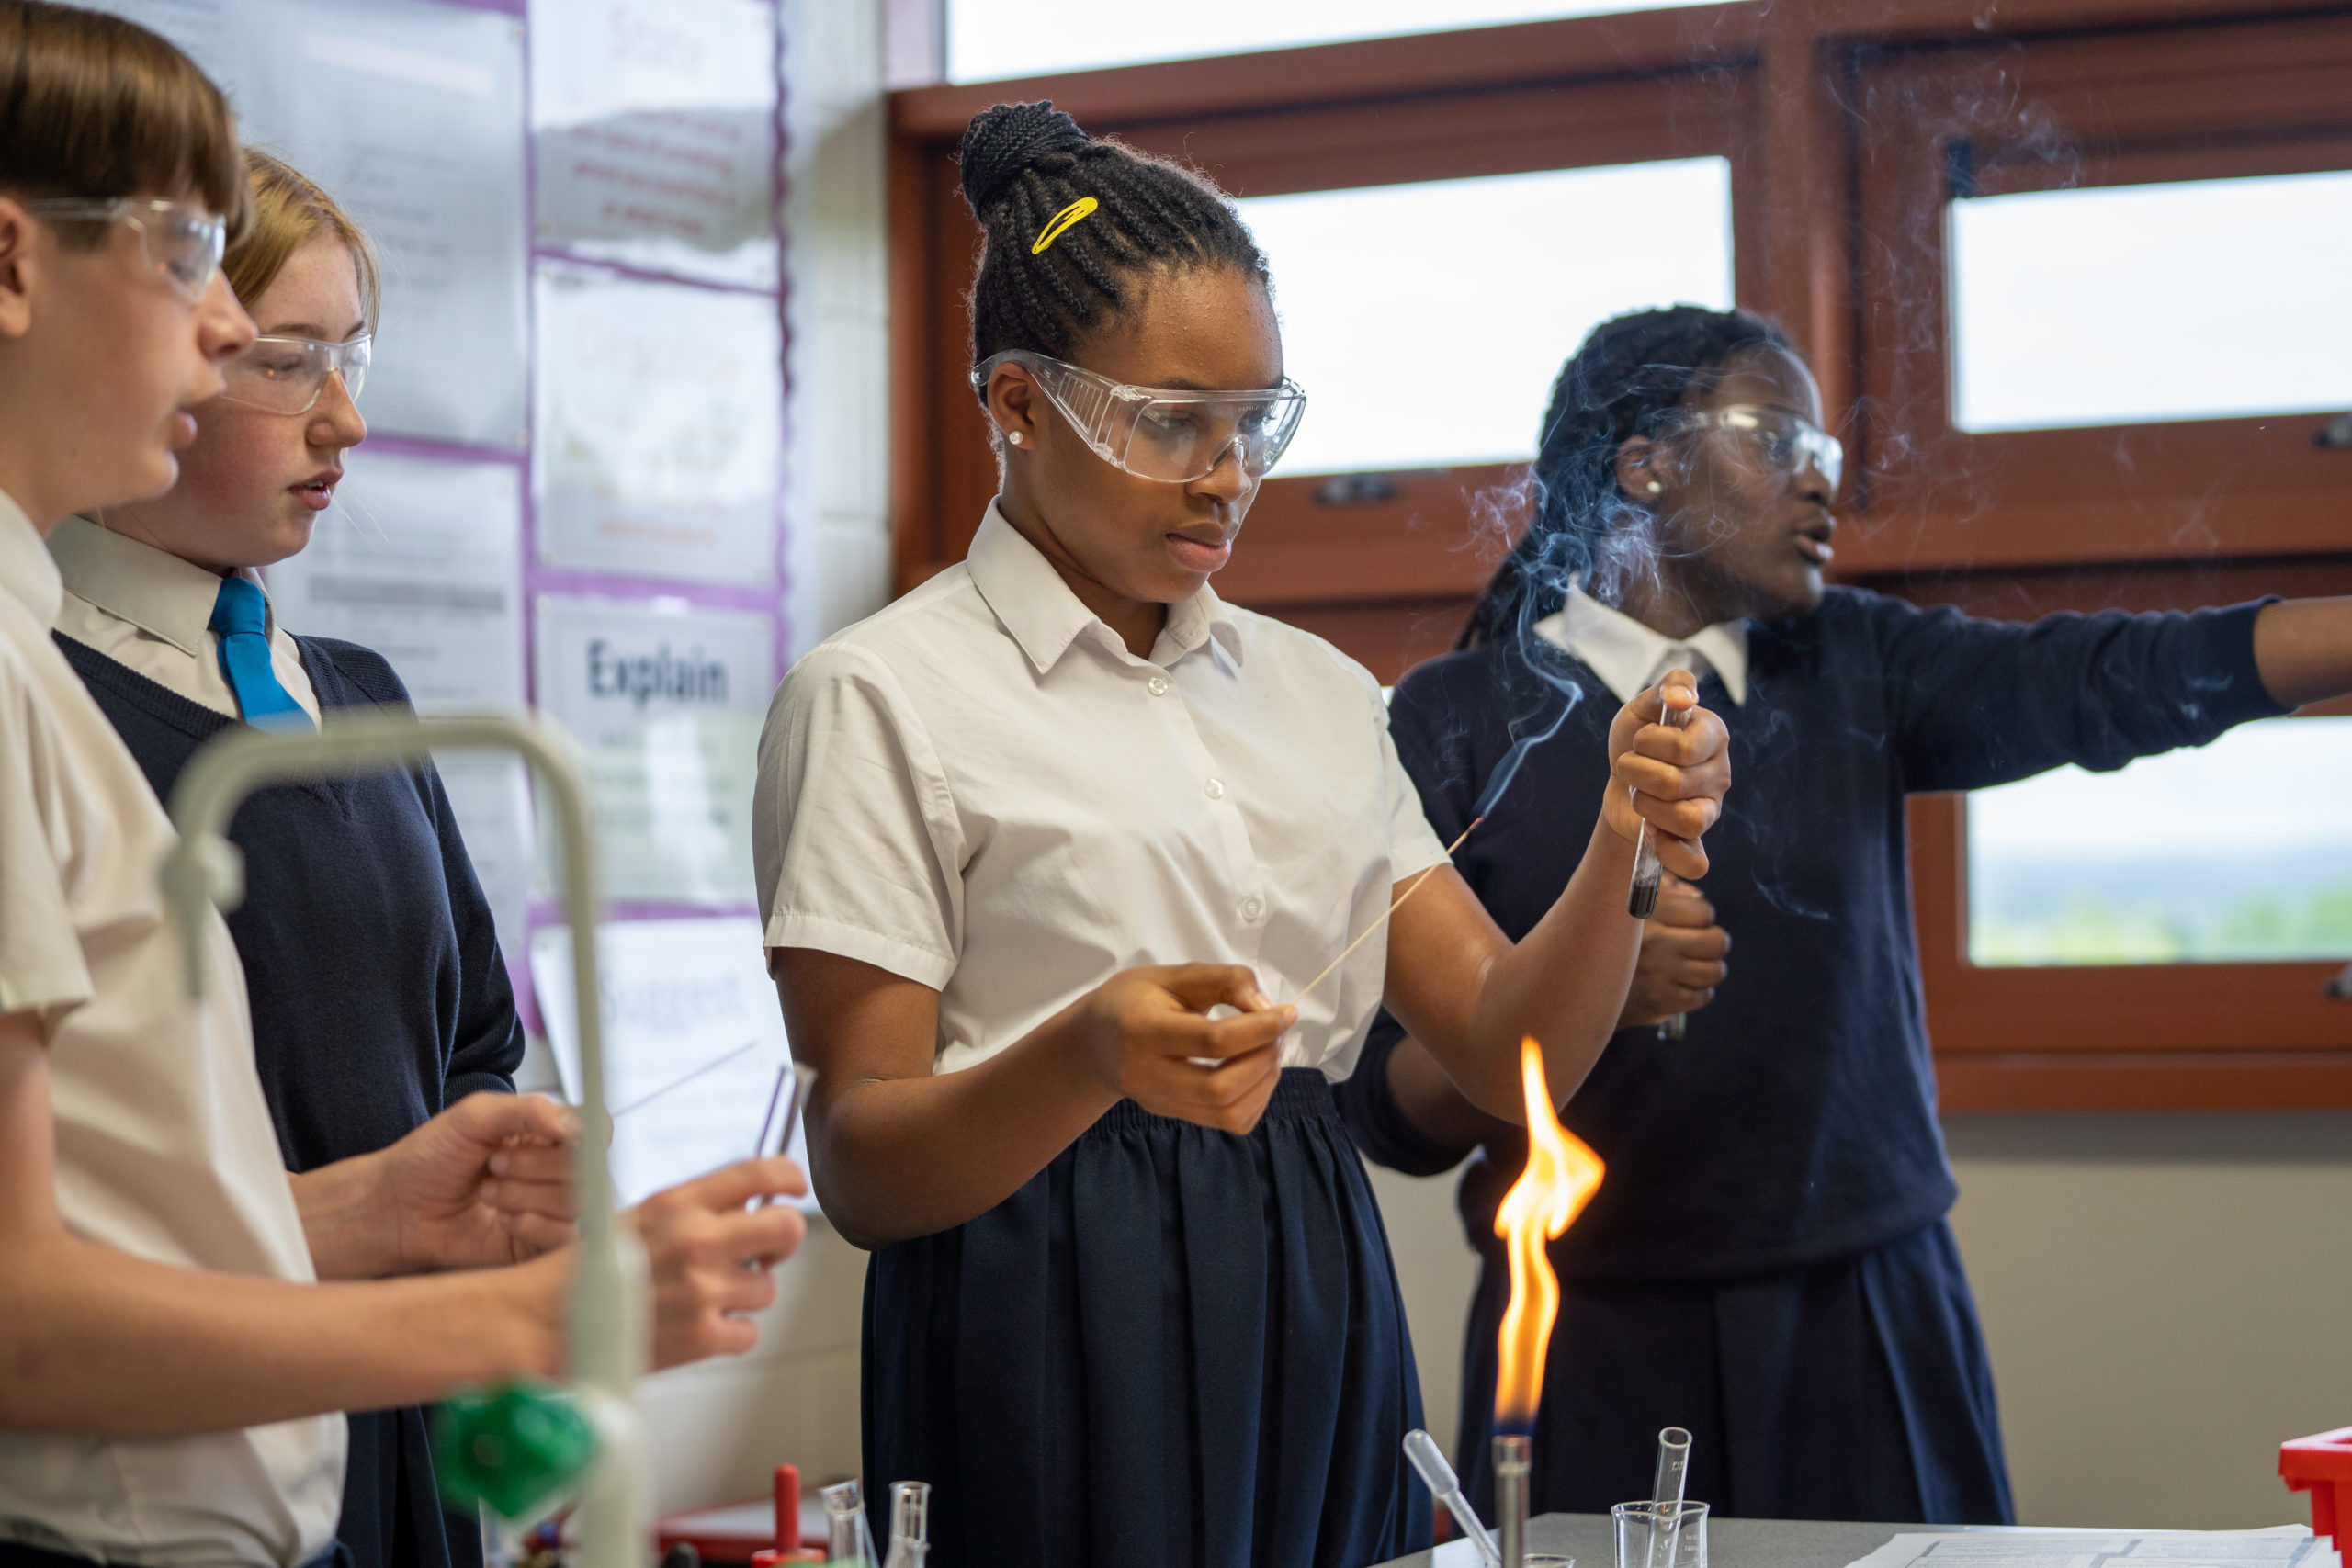 A small group of students are seen wearing safety goggles conducting an experiment involving Bunsen Burners in a Science Lab.